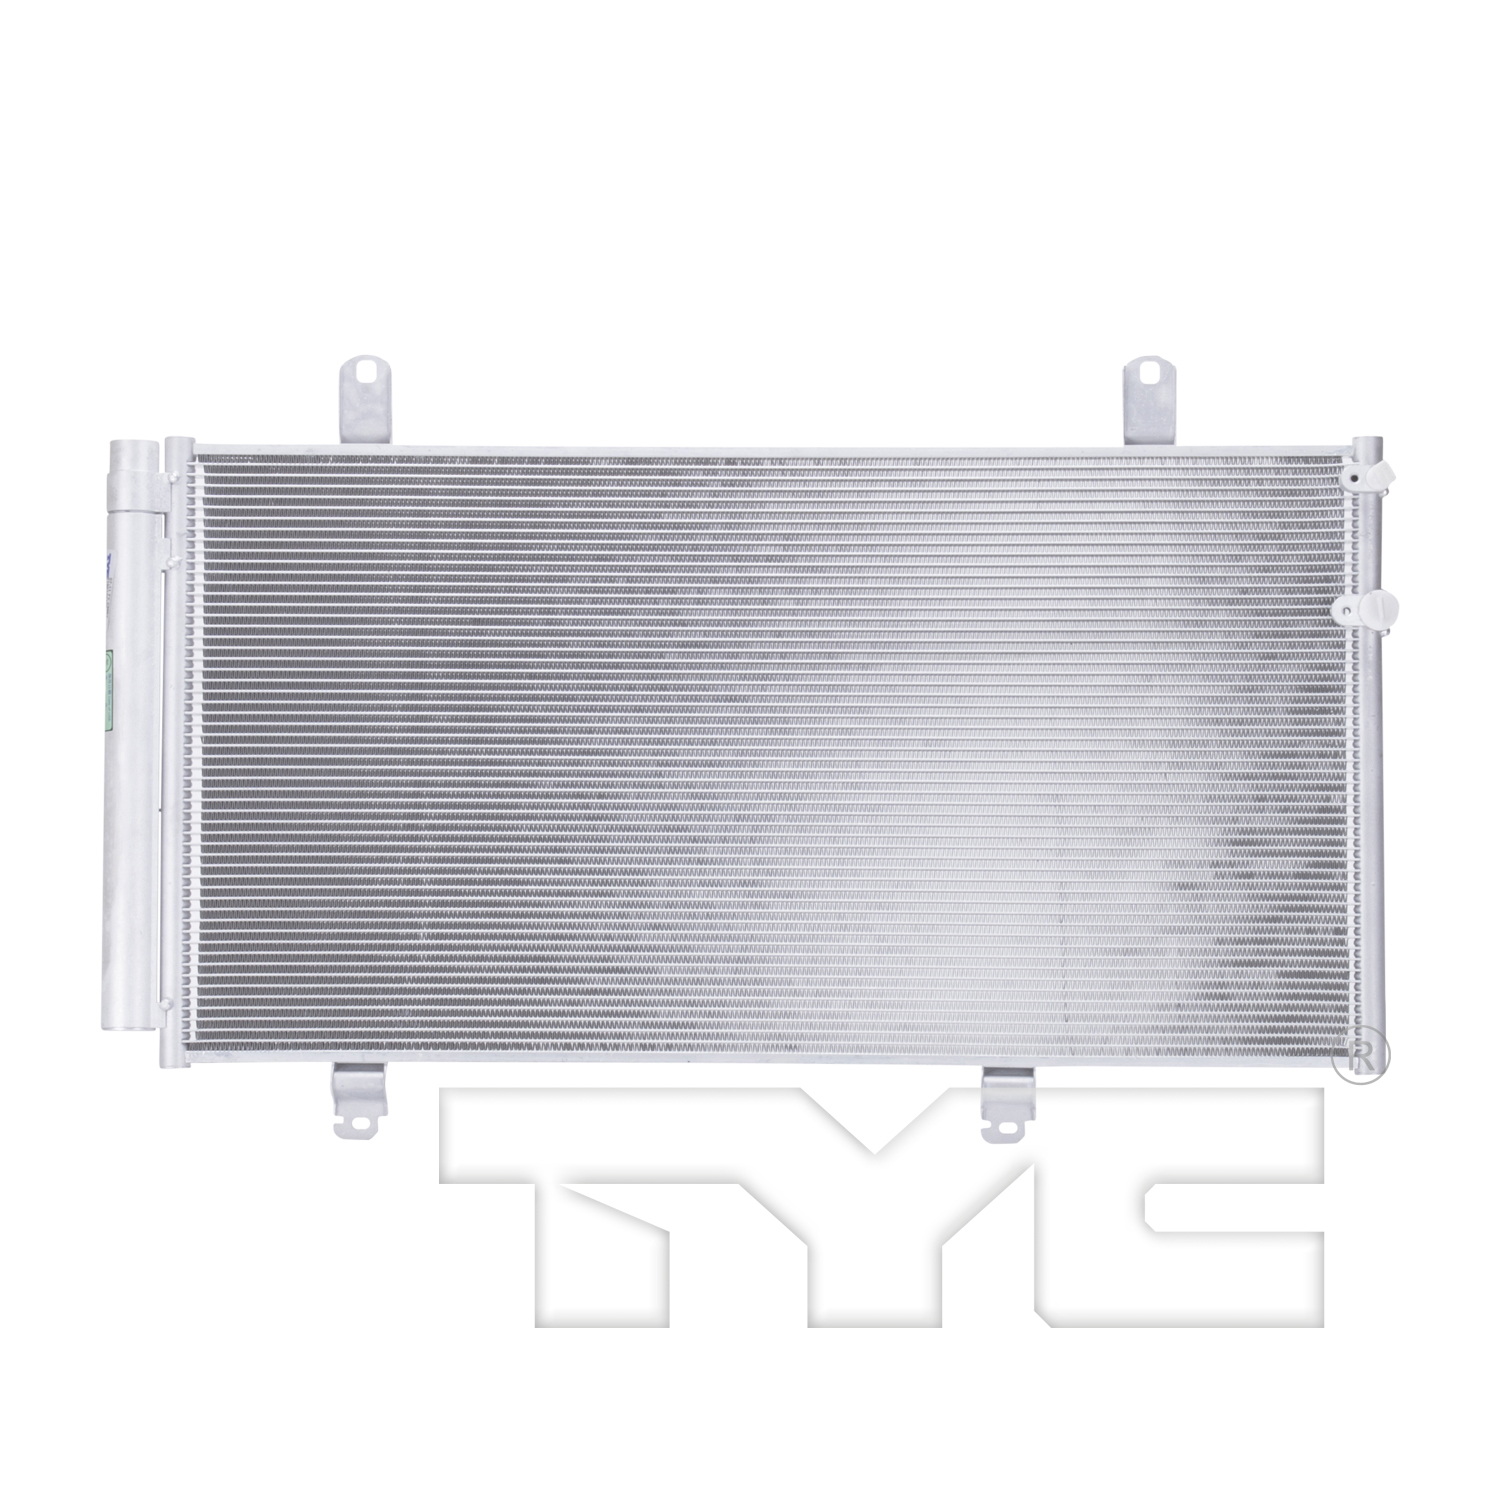 Aftermarket AC CONDENSERS for TOYOTA - AVALON, AVALON,06-12,Air conditioning condenser